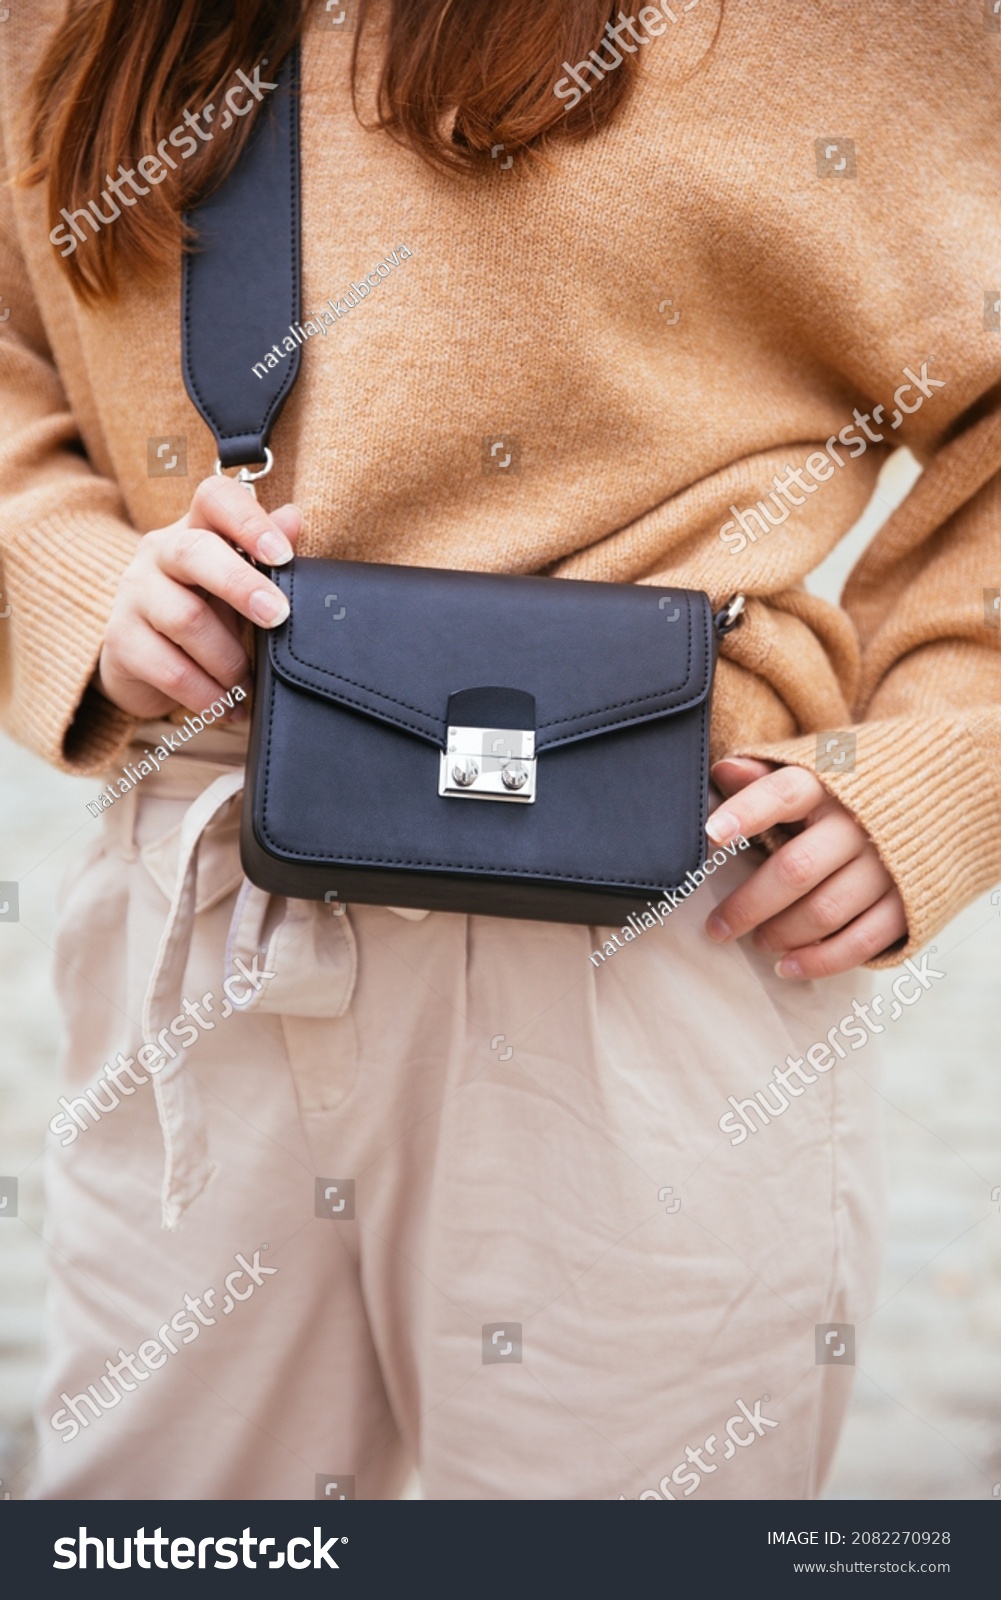 Closeup of black small handbag in woman's hand. Fall spring fashion outfit camel sweater and trendy white jeans. Fashion detail, stylish small bag.   #2082270928